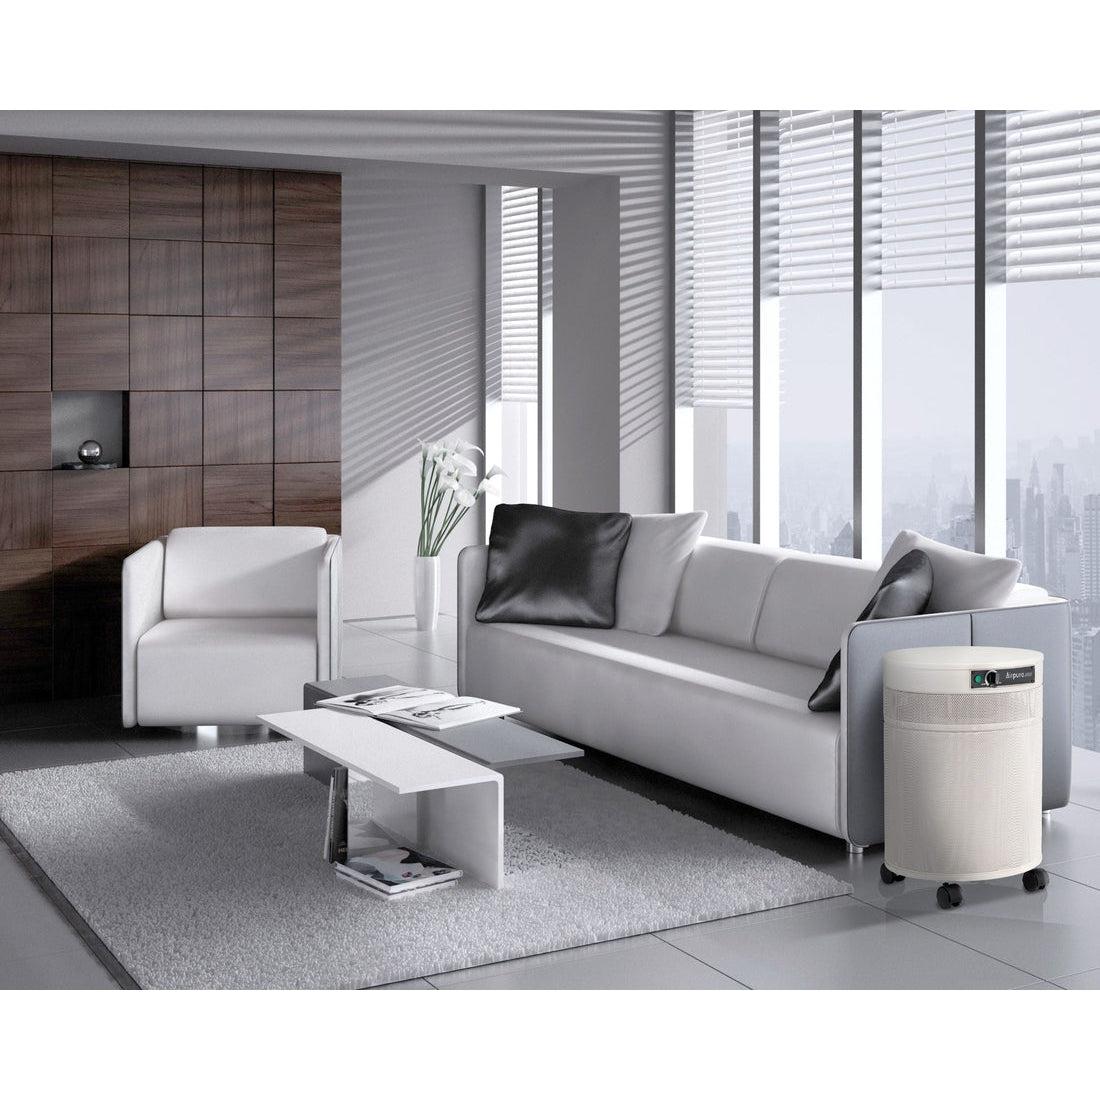 Airpura I700 Air Purifier - Purely Relaxation